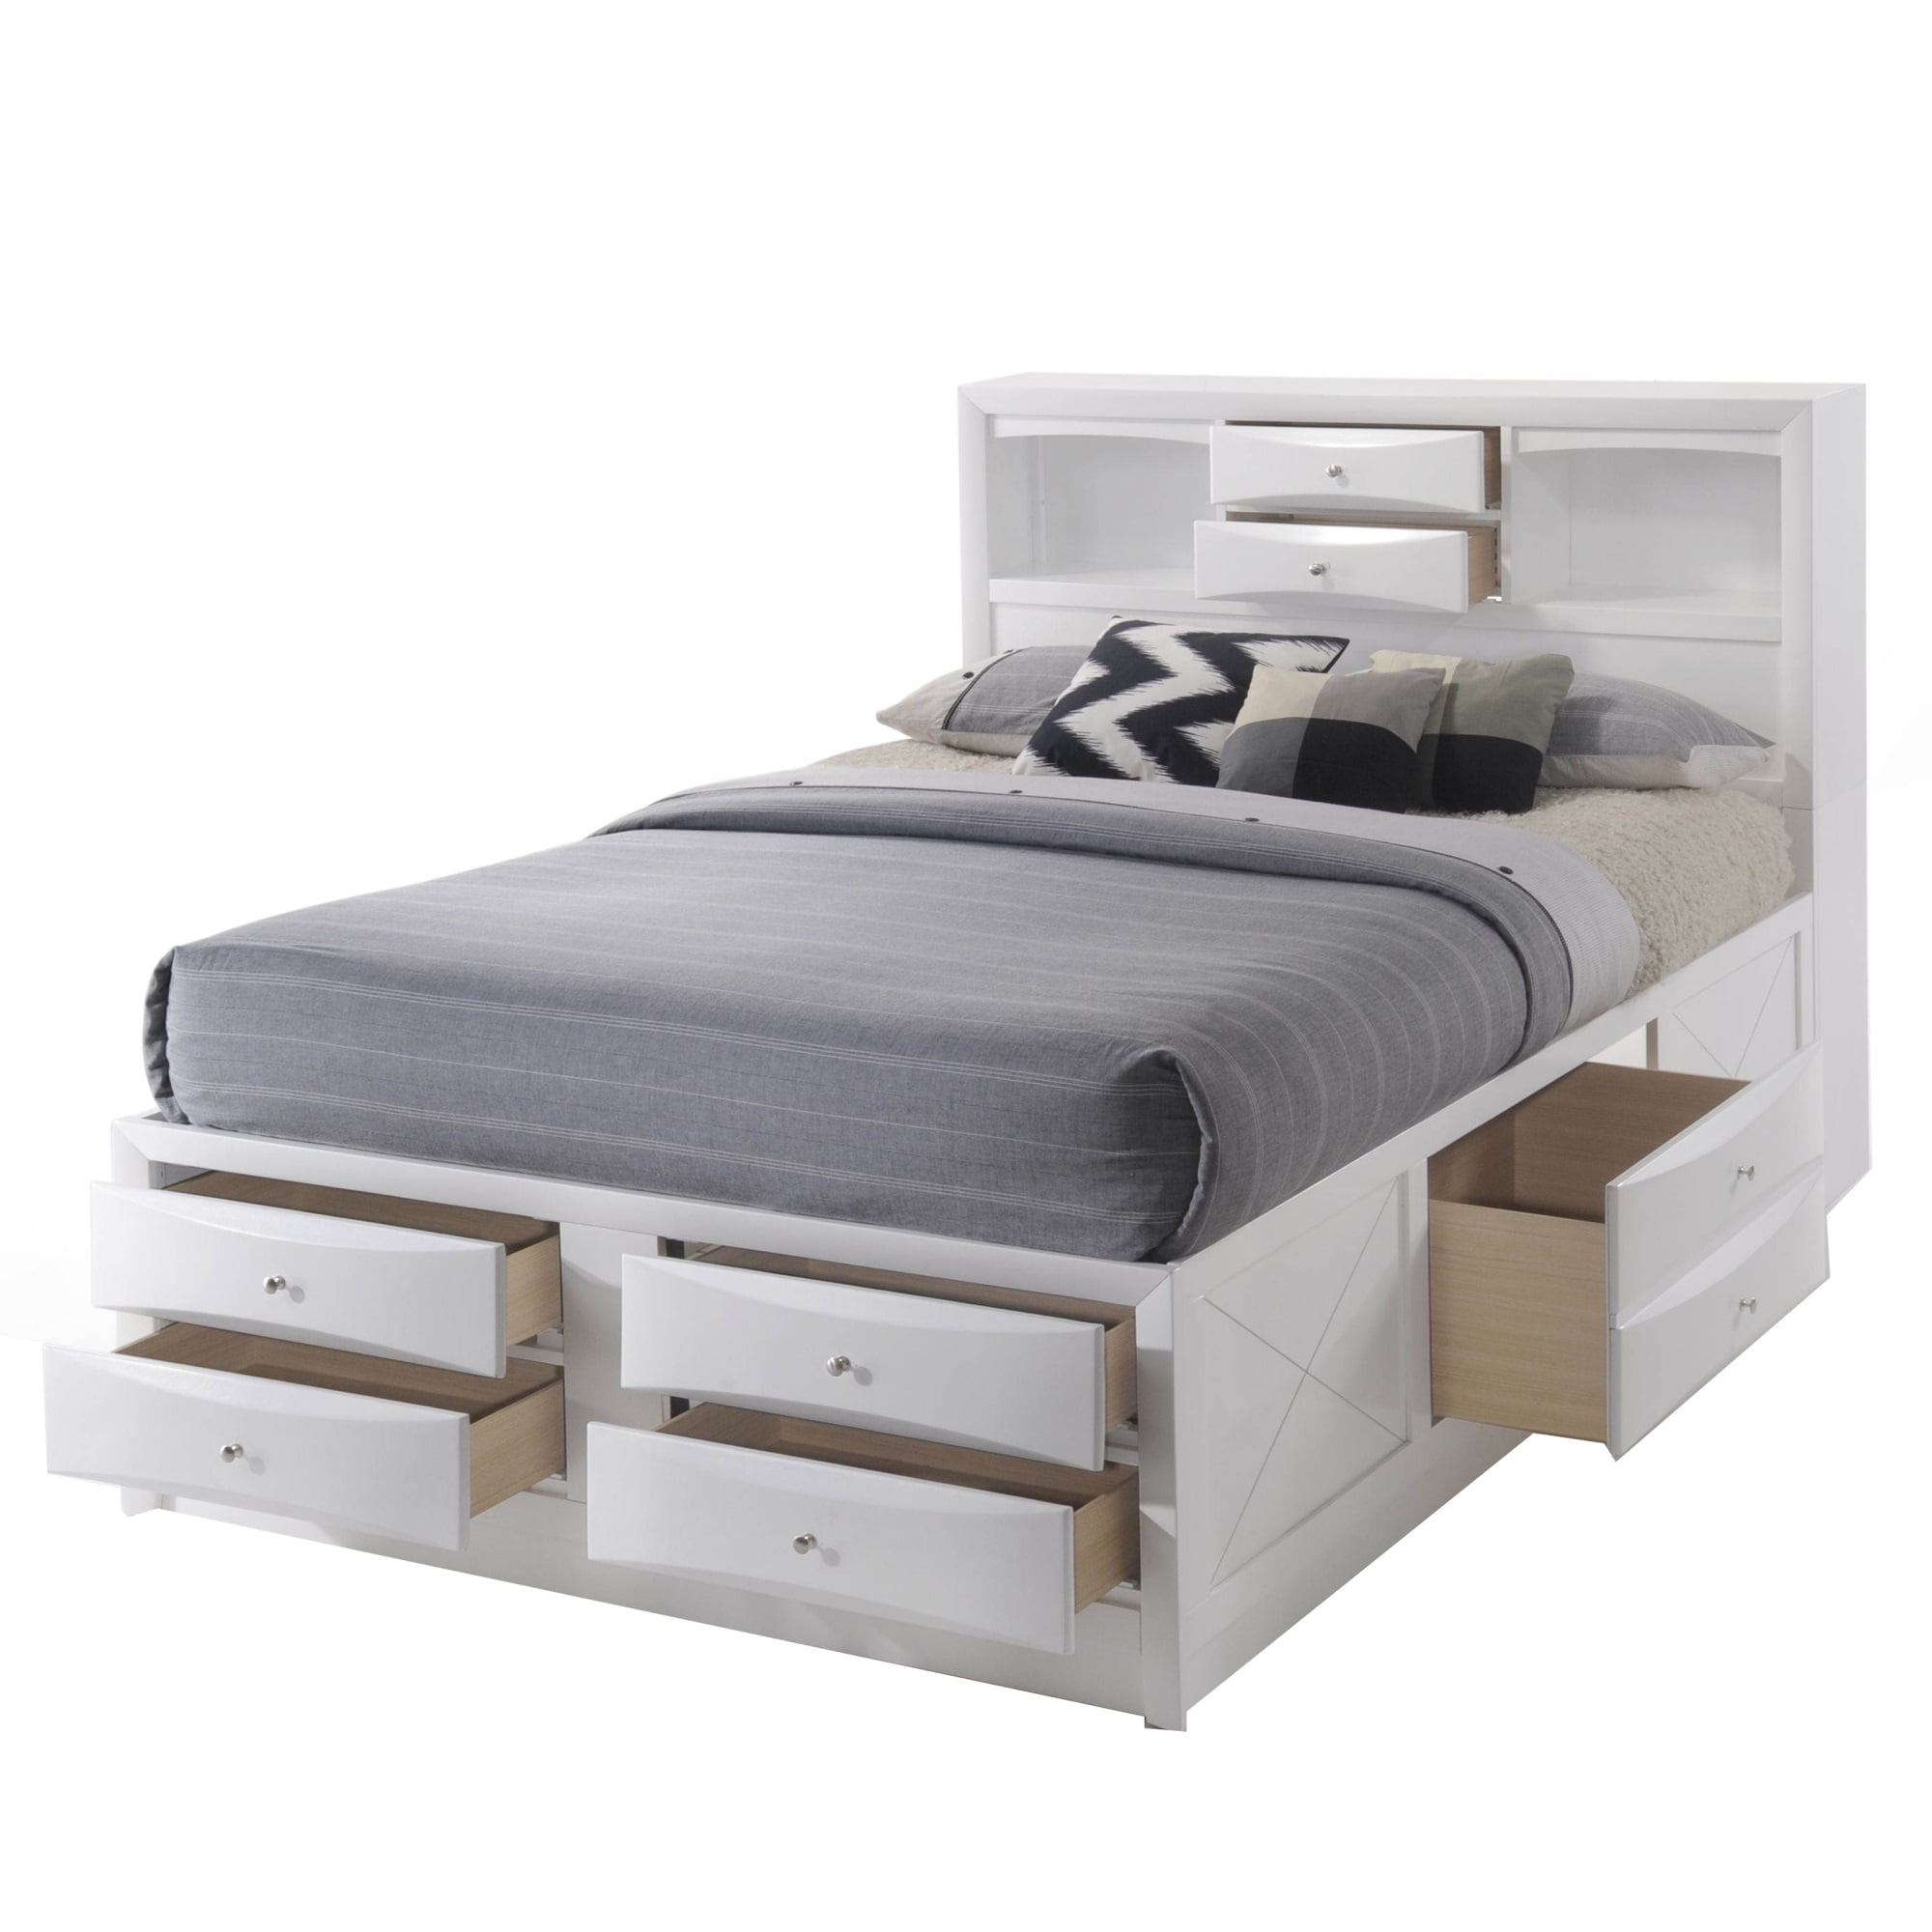 Eight Drawer Full Size Storage Bed With, King Bed Frame With Storage Drawers And Headboard